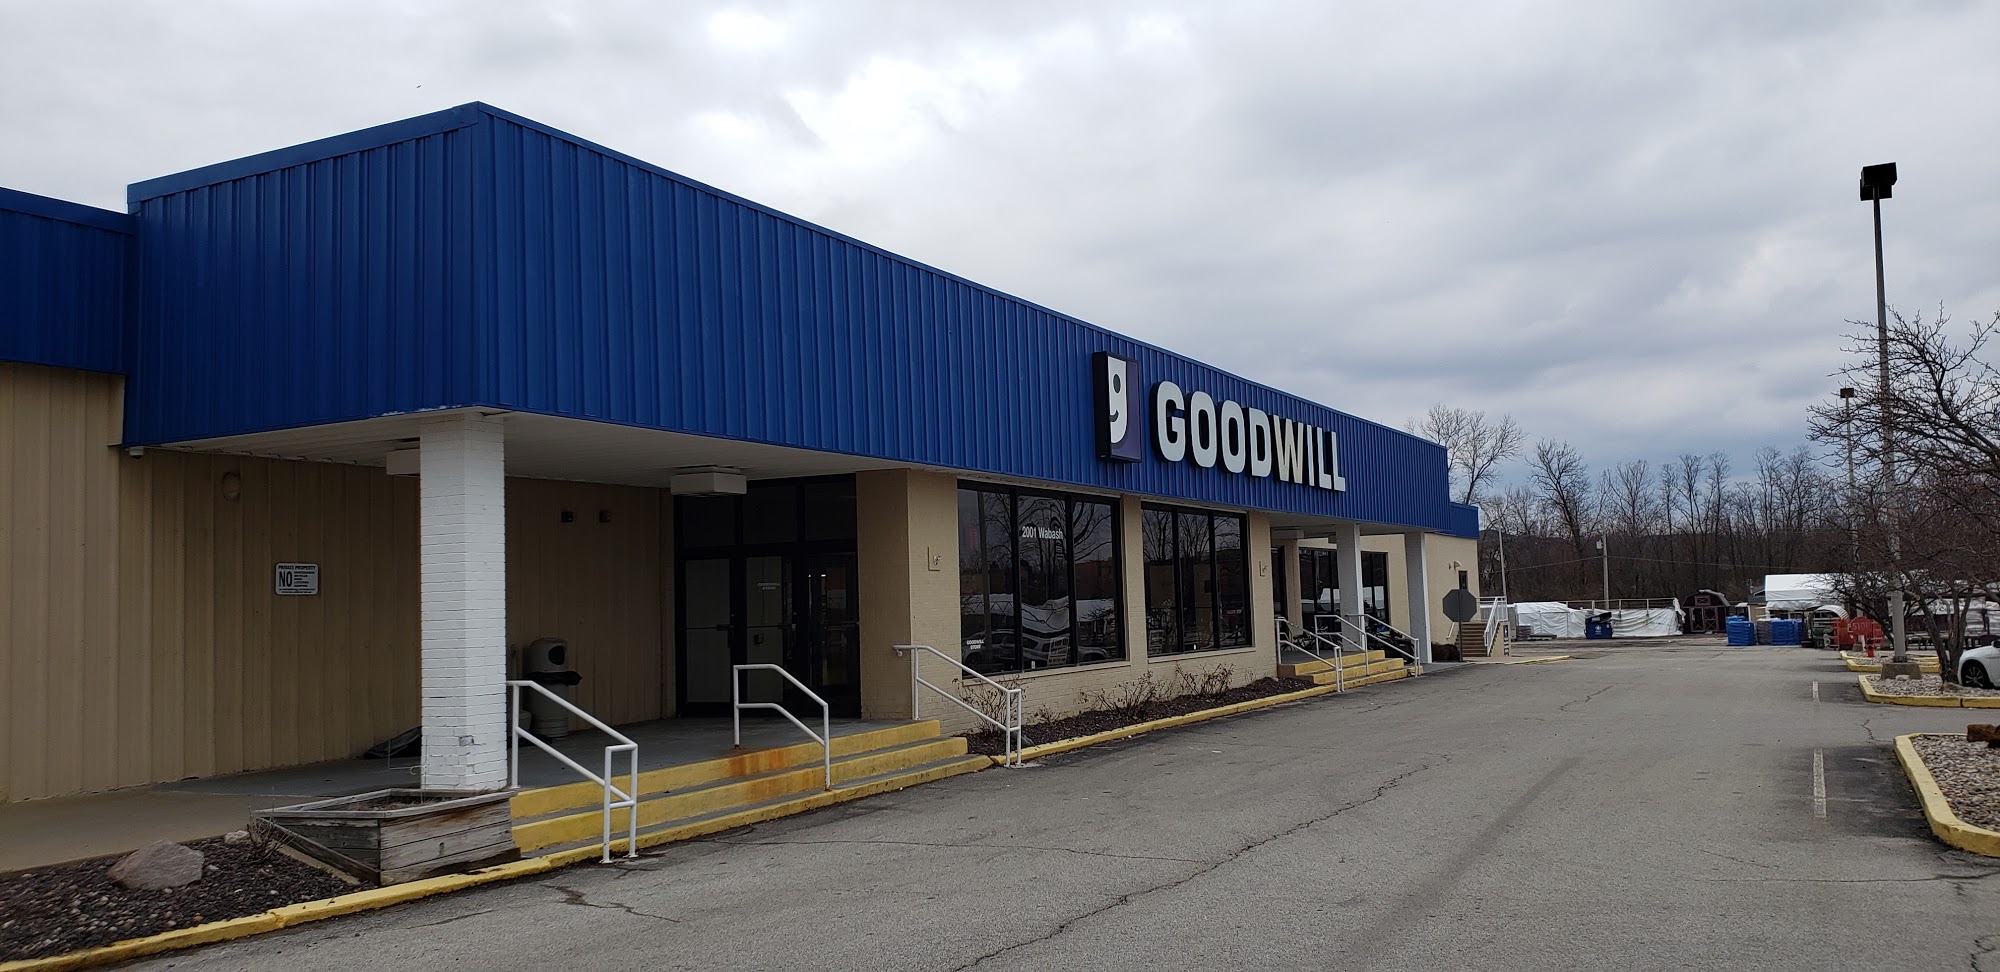 Goodwill Springfield IL Wabash Ave. - Land of Lincoln Goodwill Industries